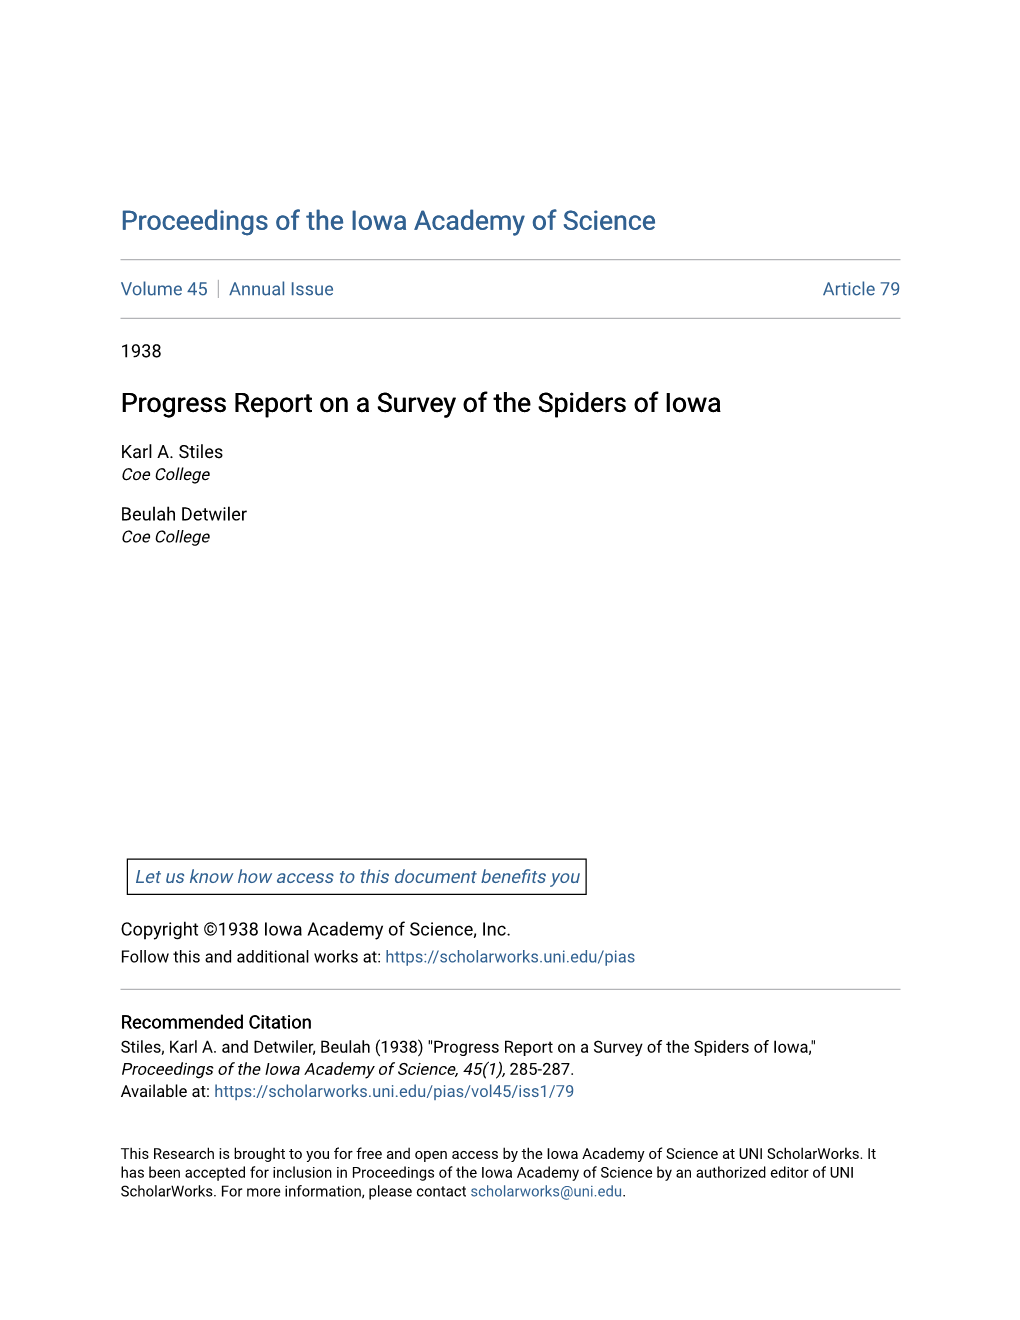 Progress Report on a Survey of the Spiders of Iowa